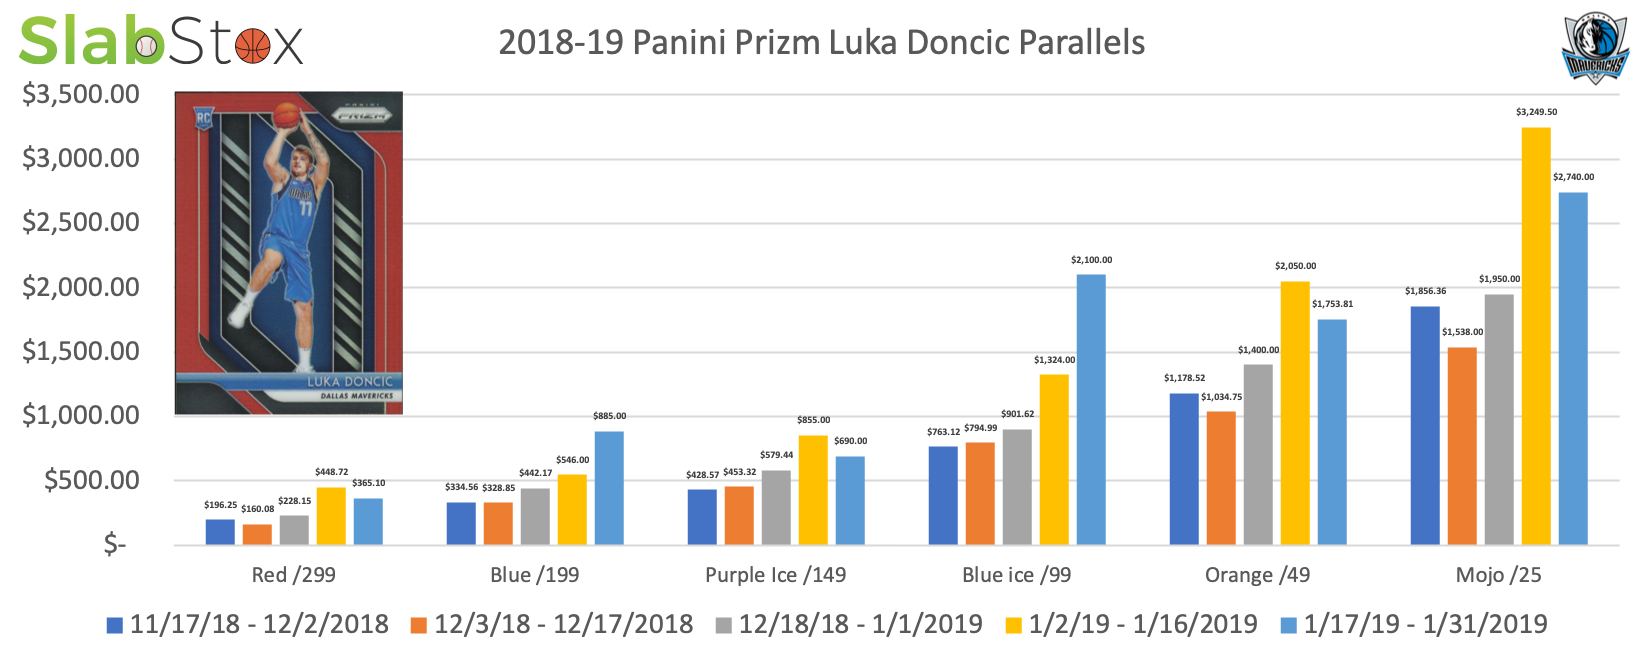 SlabStox graph of parallels for 2018-19 Panini Prizm Luka Doncic sports trading card